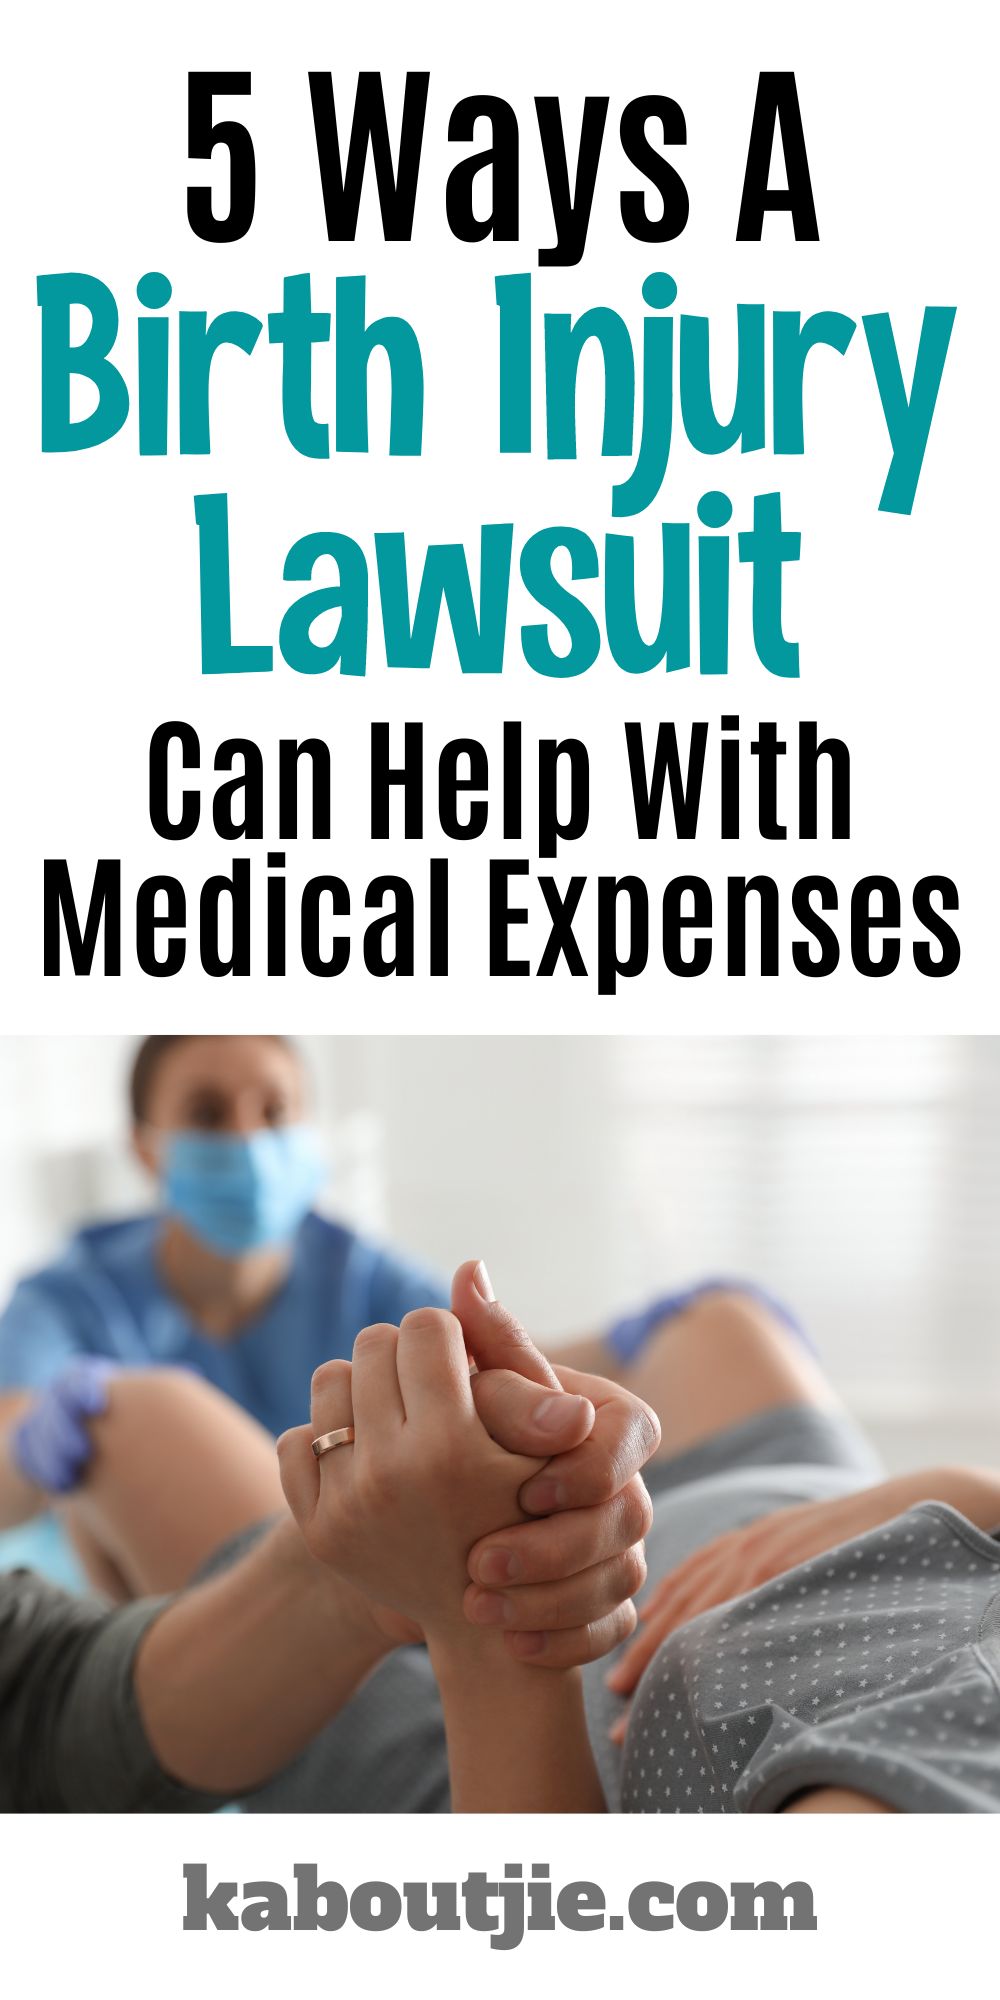 5 Ways A Birth Injury Lawsuit Can Help With Medical Expenses